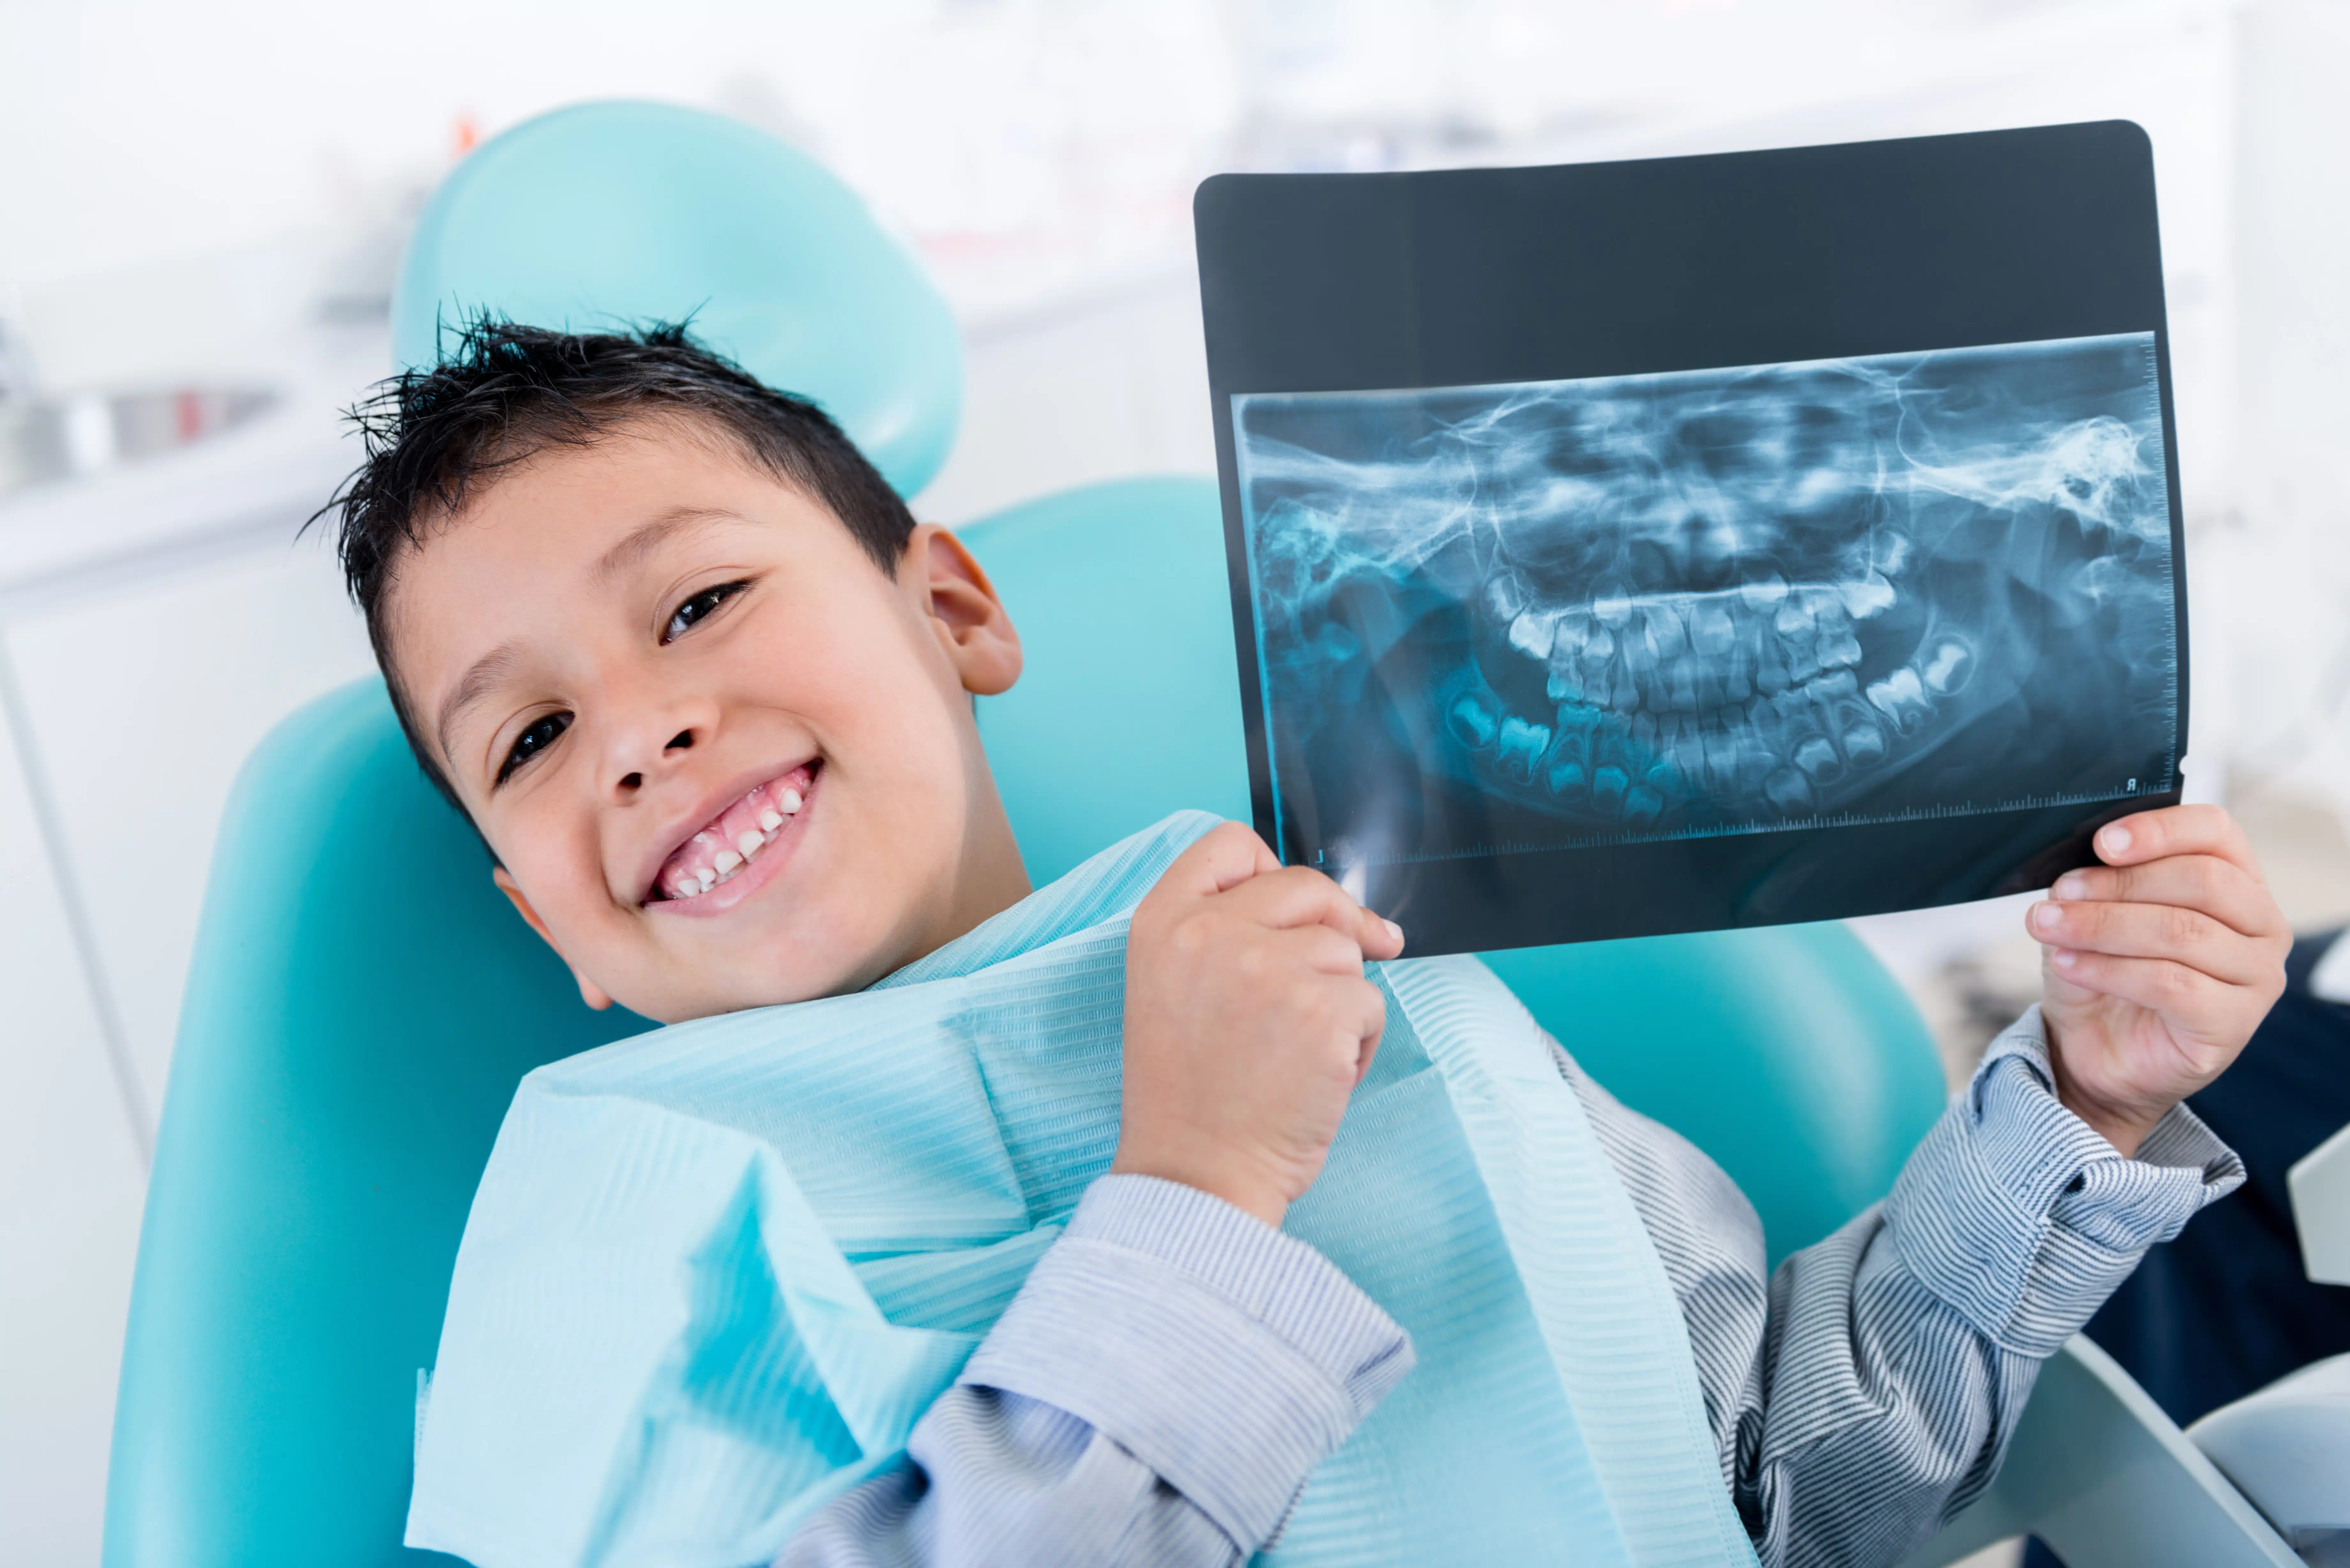 Pediatric dentistry is a specialty in the field that addresses the unique needs of your child’s smile through kid-friendly procedures and gentle care.